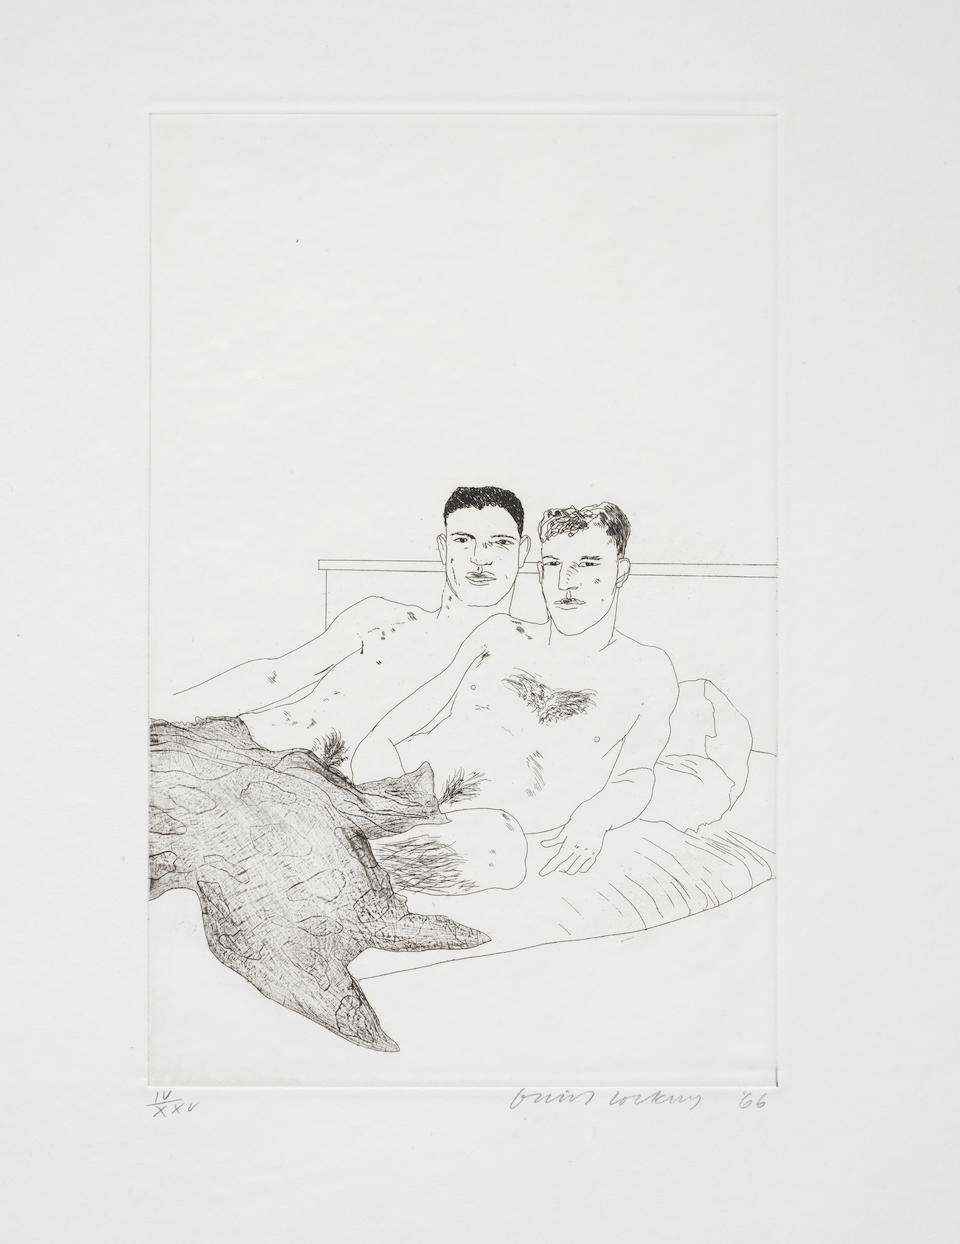 David Hockney (British, born 1937) Illustrations for Fourteen Poems from C.P. Cavafy The complete portfolio, 1966, edition E, comprising 13 etchings with aquatint, on J. Barcham Green vellum wove, each signed, dated and numbered IV/XXV in pencil, together with title, contents, text and justification pages, published 1967 by Editions Alecto, London, the plates stamped 'ea 362-373,431' respectively on the reverse, the full sheets, loose as issued, each within a separate folder containing the respective poem, within the original black leather portfolio box, 350 x 225mm (13 3/4 x 8 7/8in)(PL); 660 x 530mm (26 x 20 7/8in)(folio)